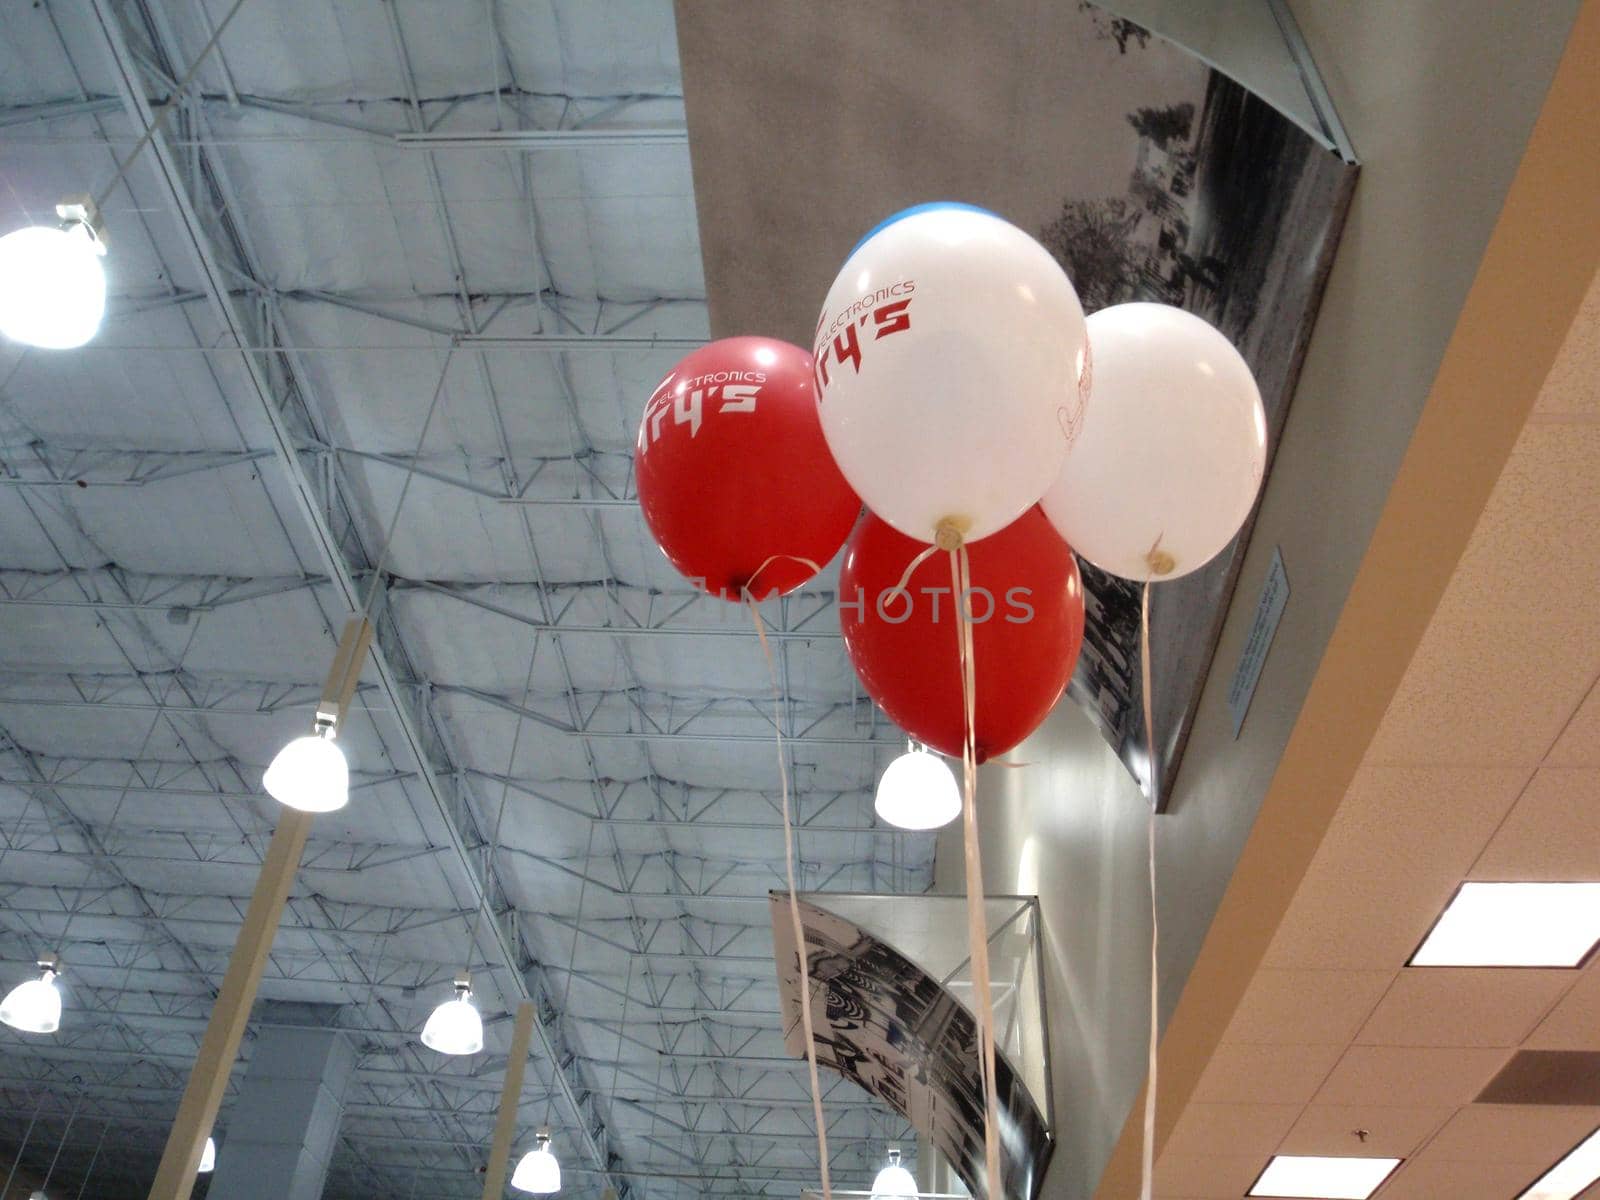 Fry's Electronics Balloons float in the air inside store by EricGBVD